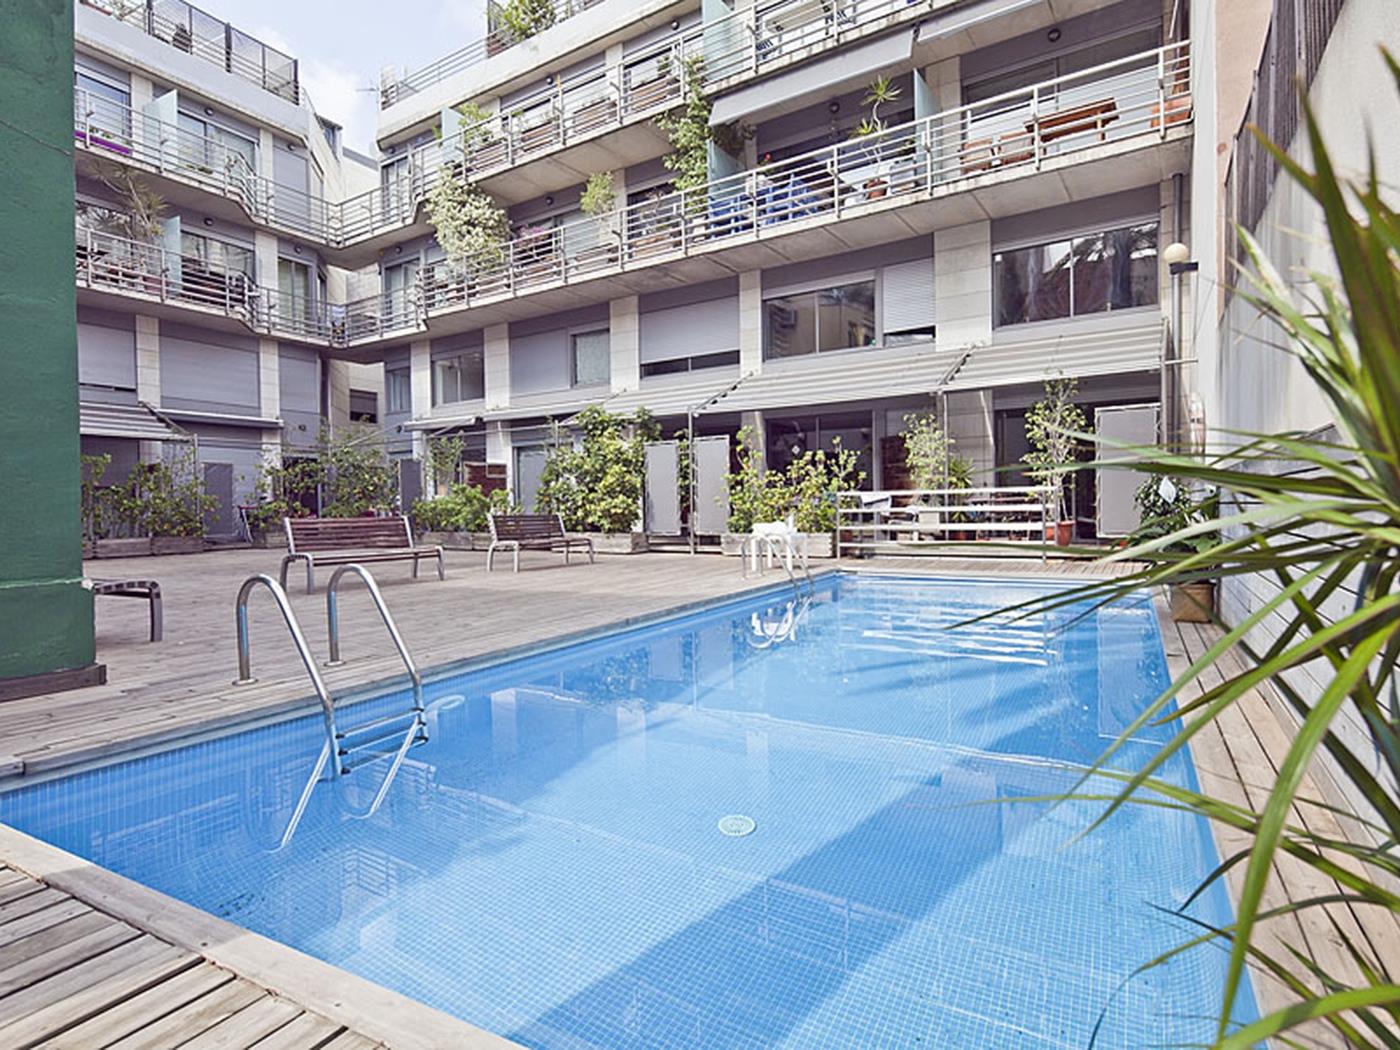 Rental accommodation for students in Barcelona with terrace and swimming pool - My Space Barcelona Apartments